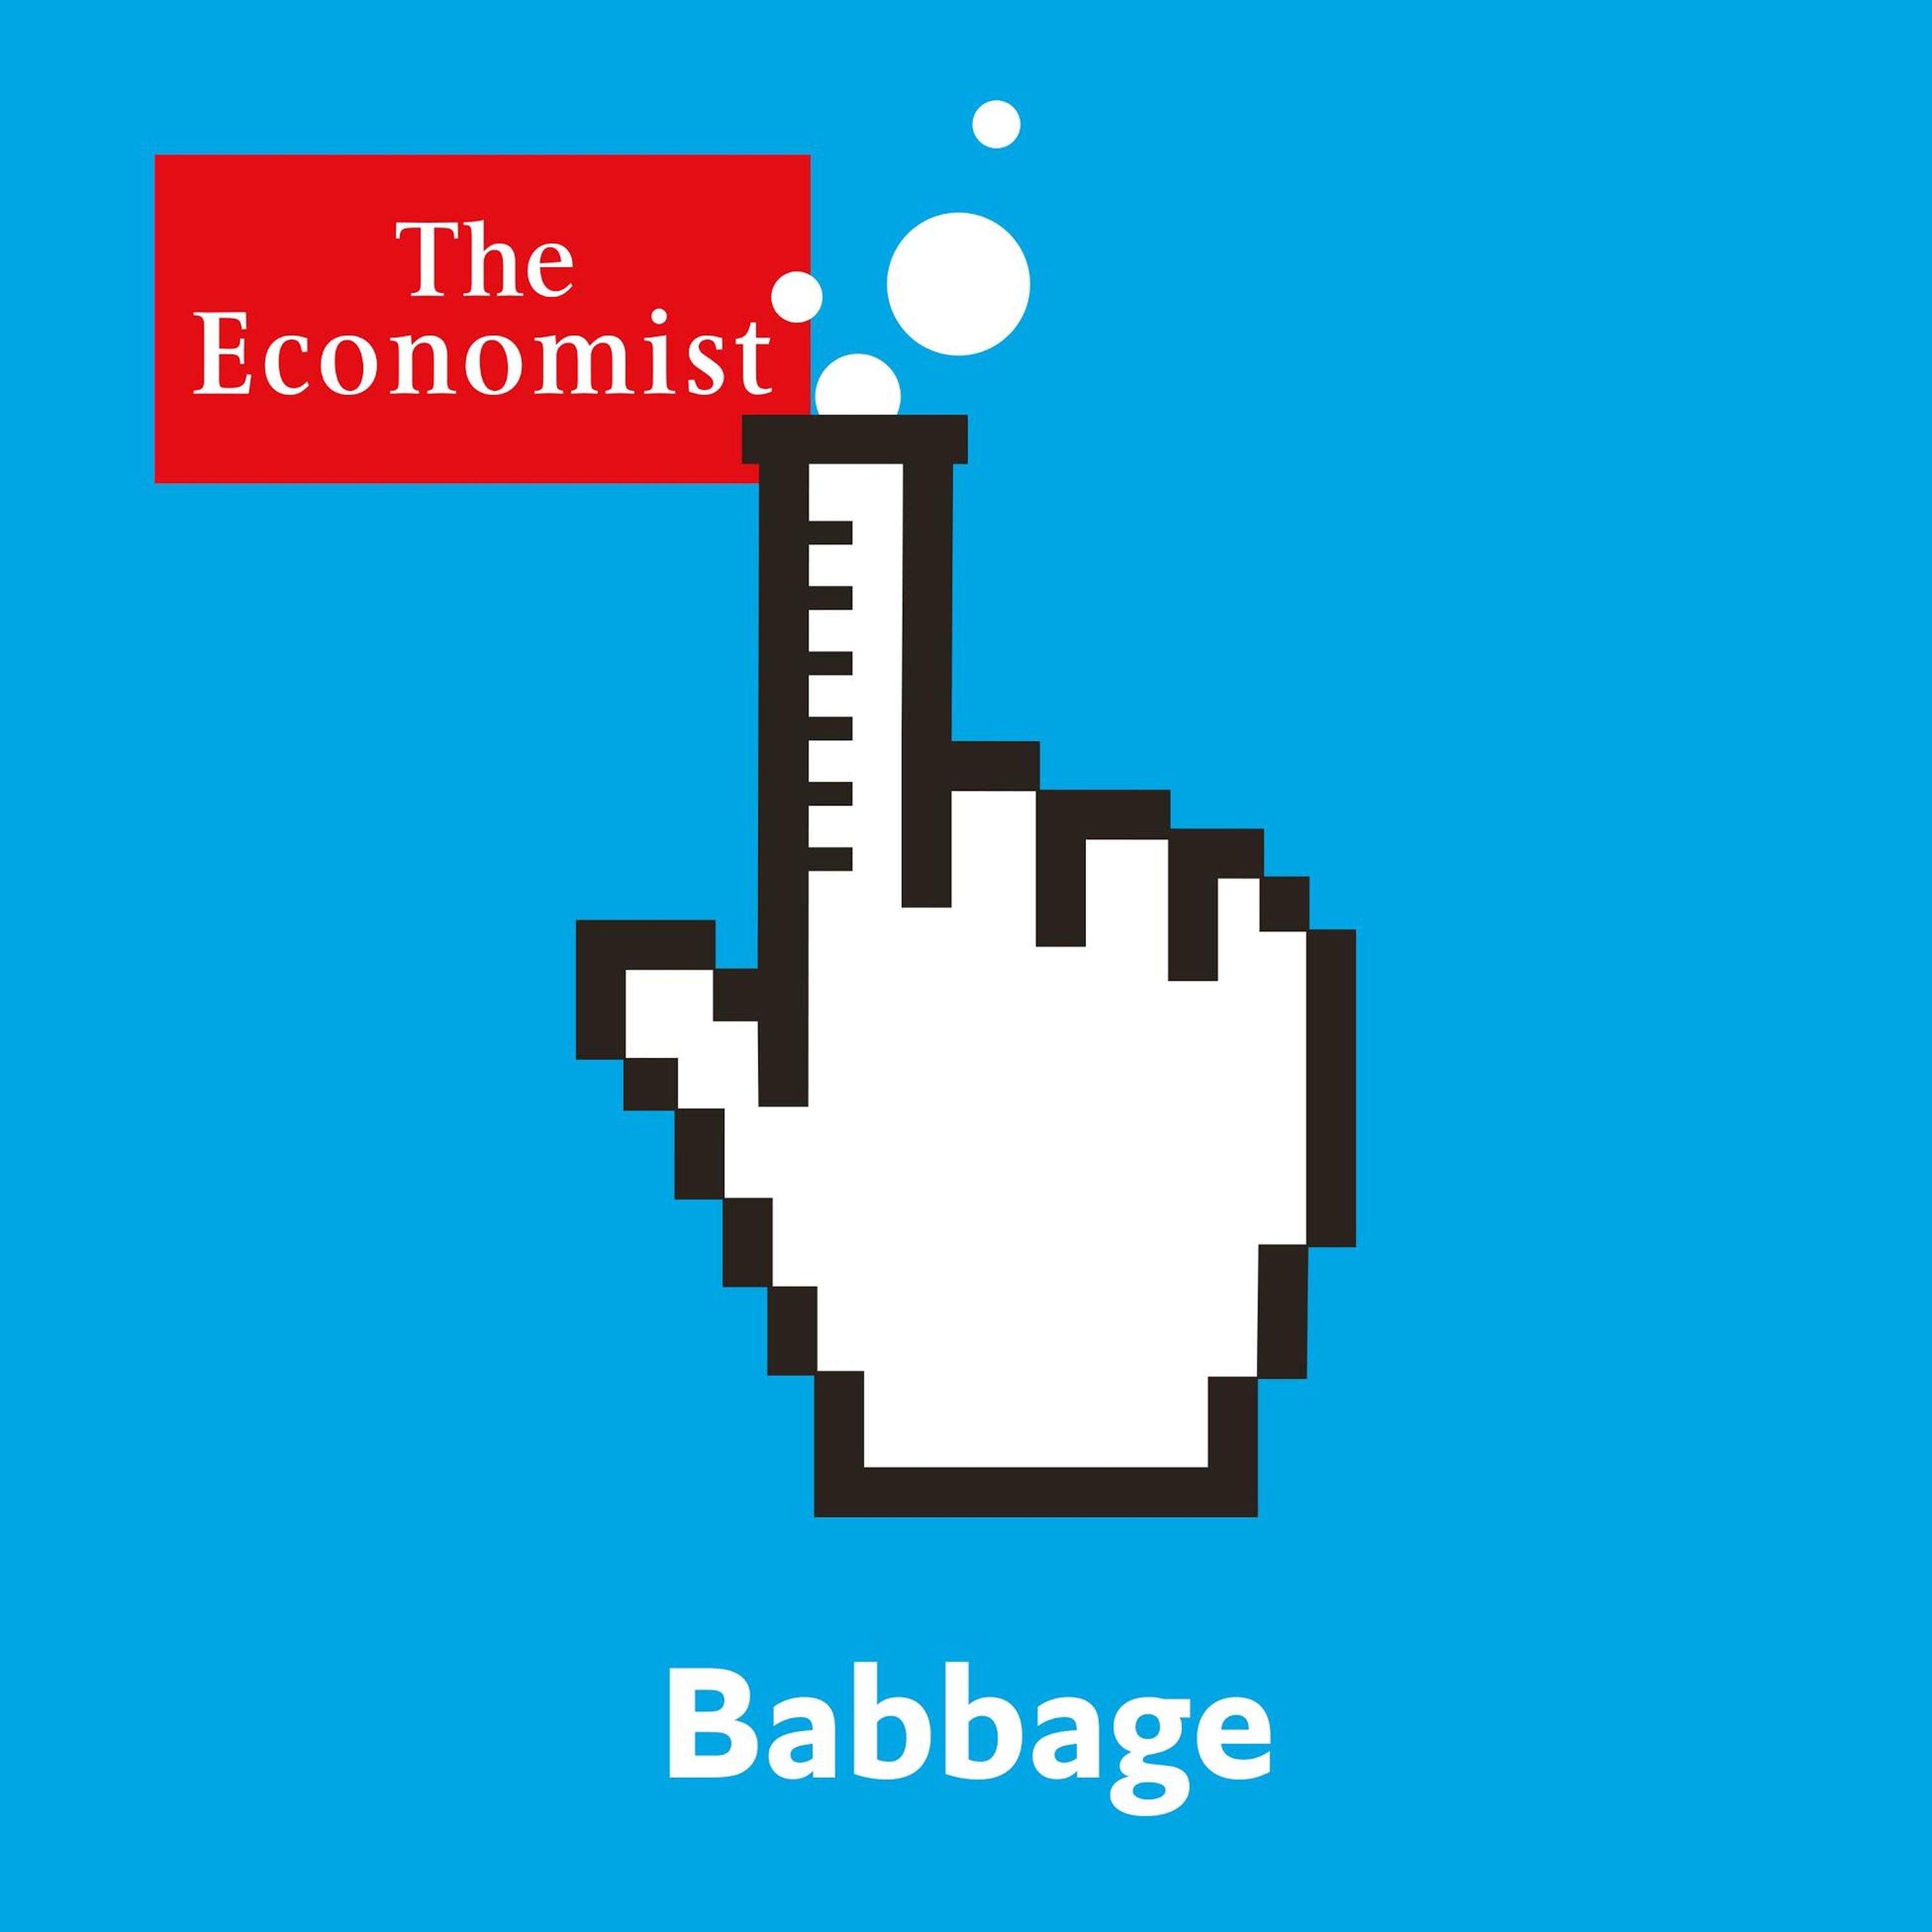 Babbage: The smartwatch will see you now